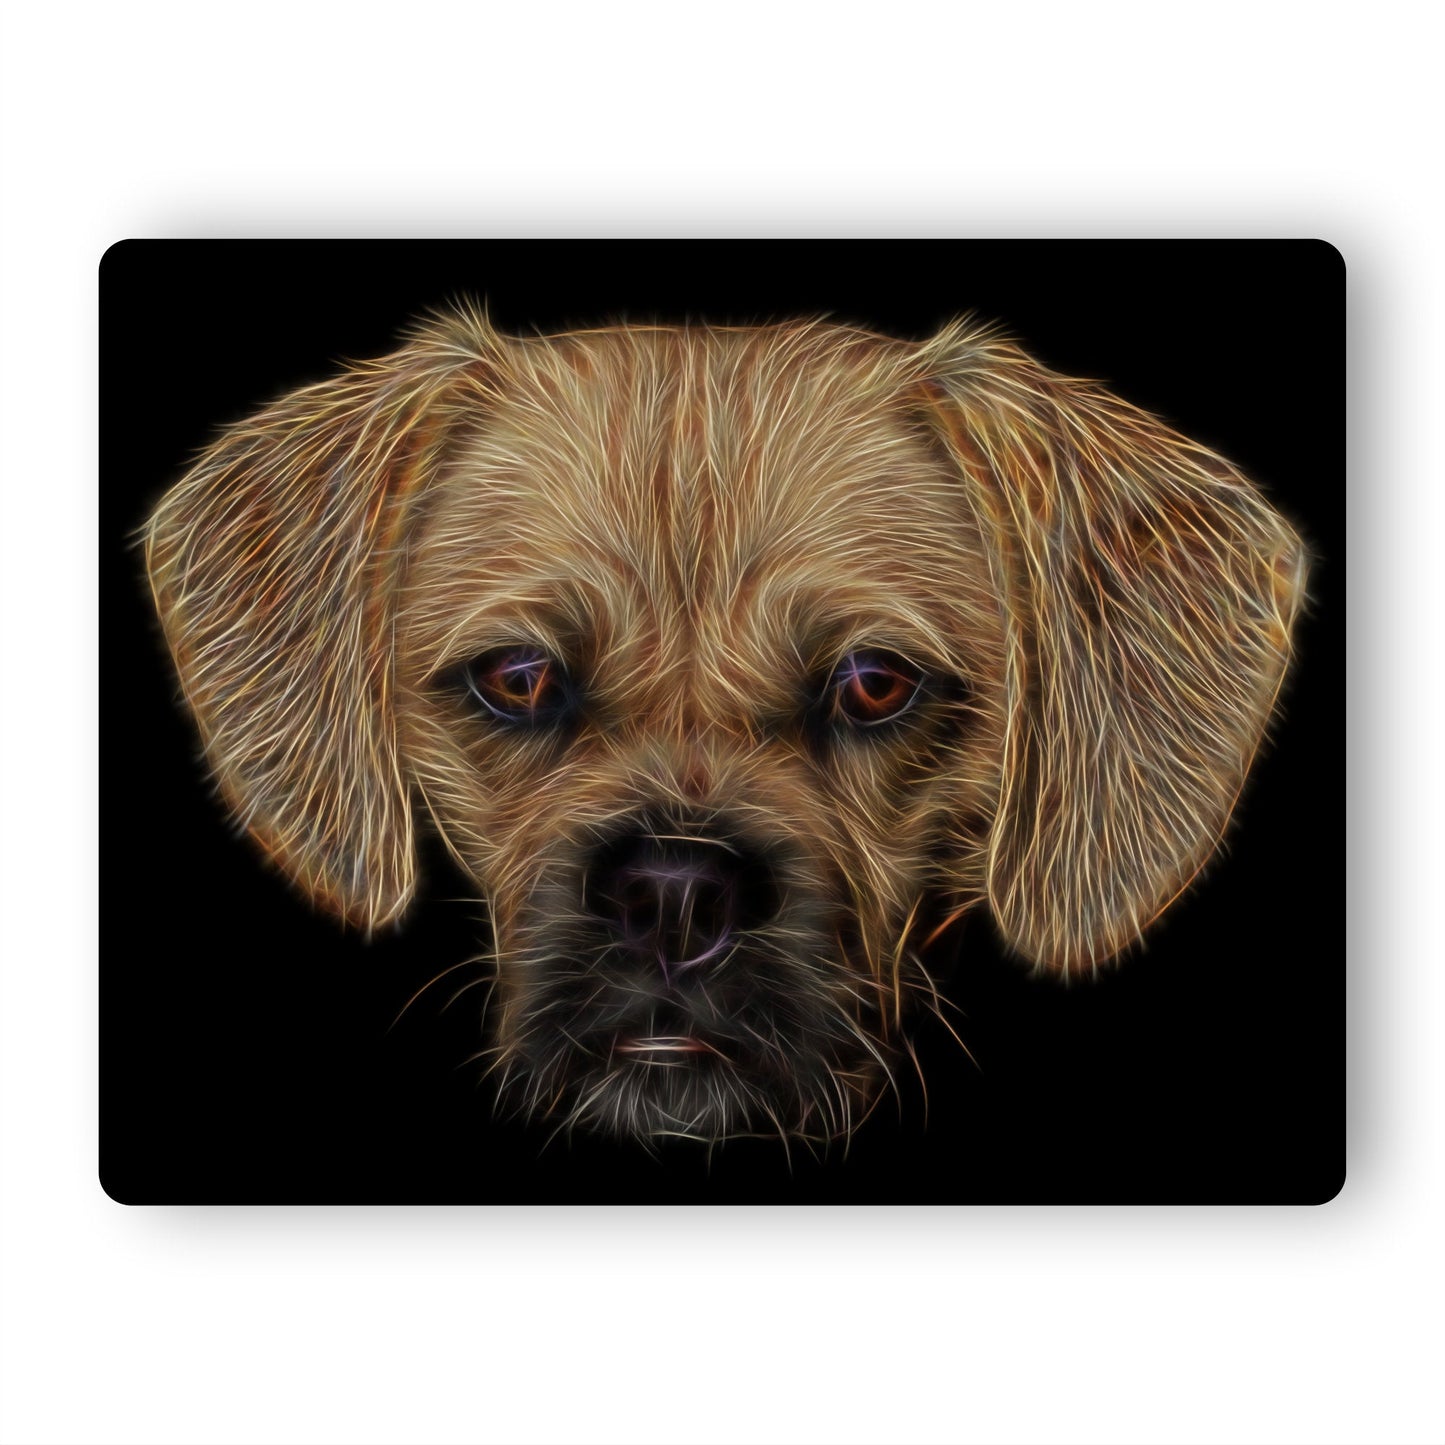 Puggle Aluminium Metal Wall Plaque with Fractal Art Design, Gift for Puggle Owner